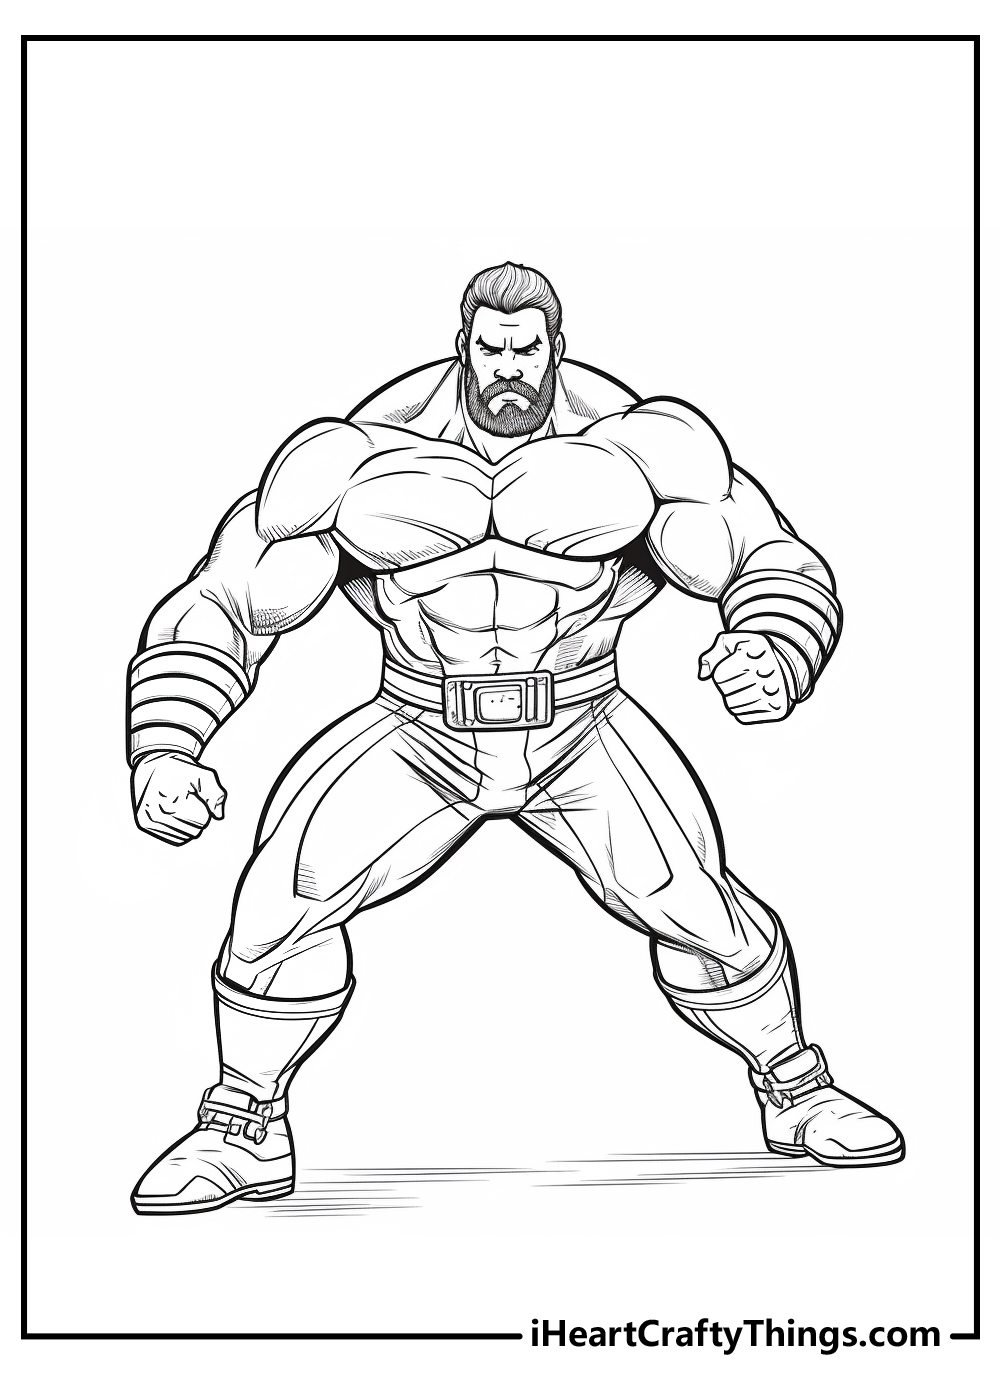 WWE coloring pages for adults